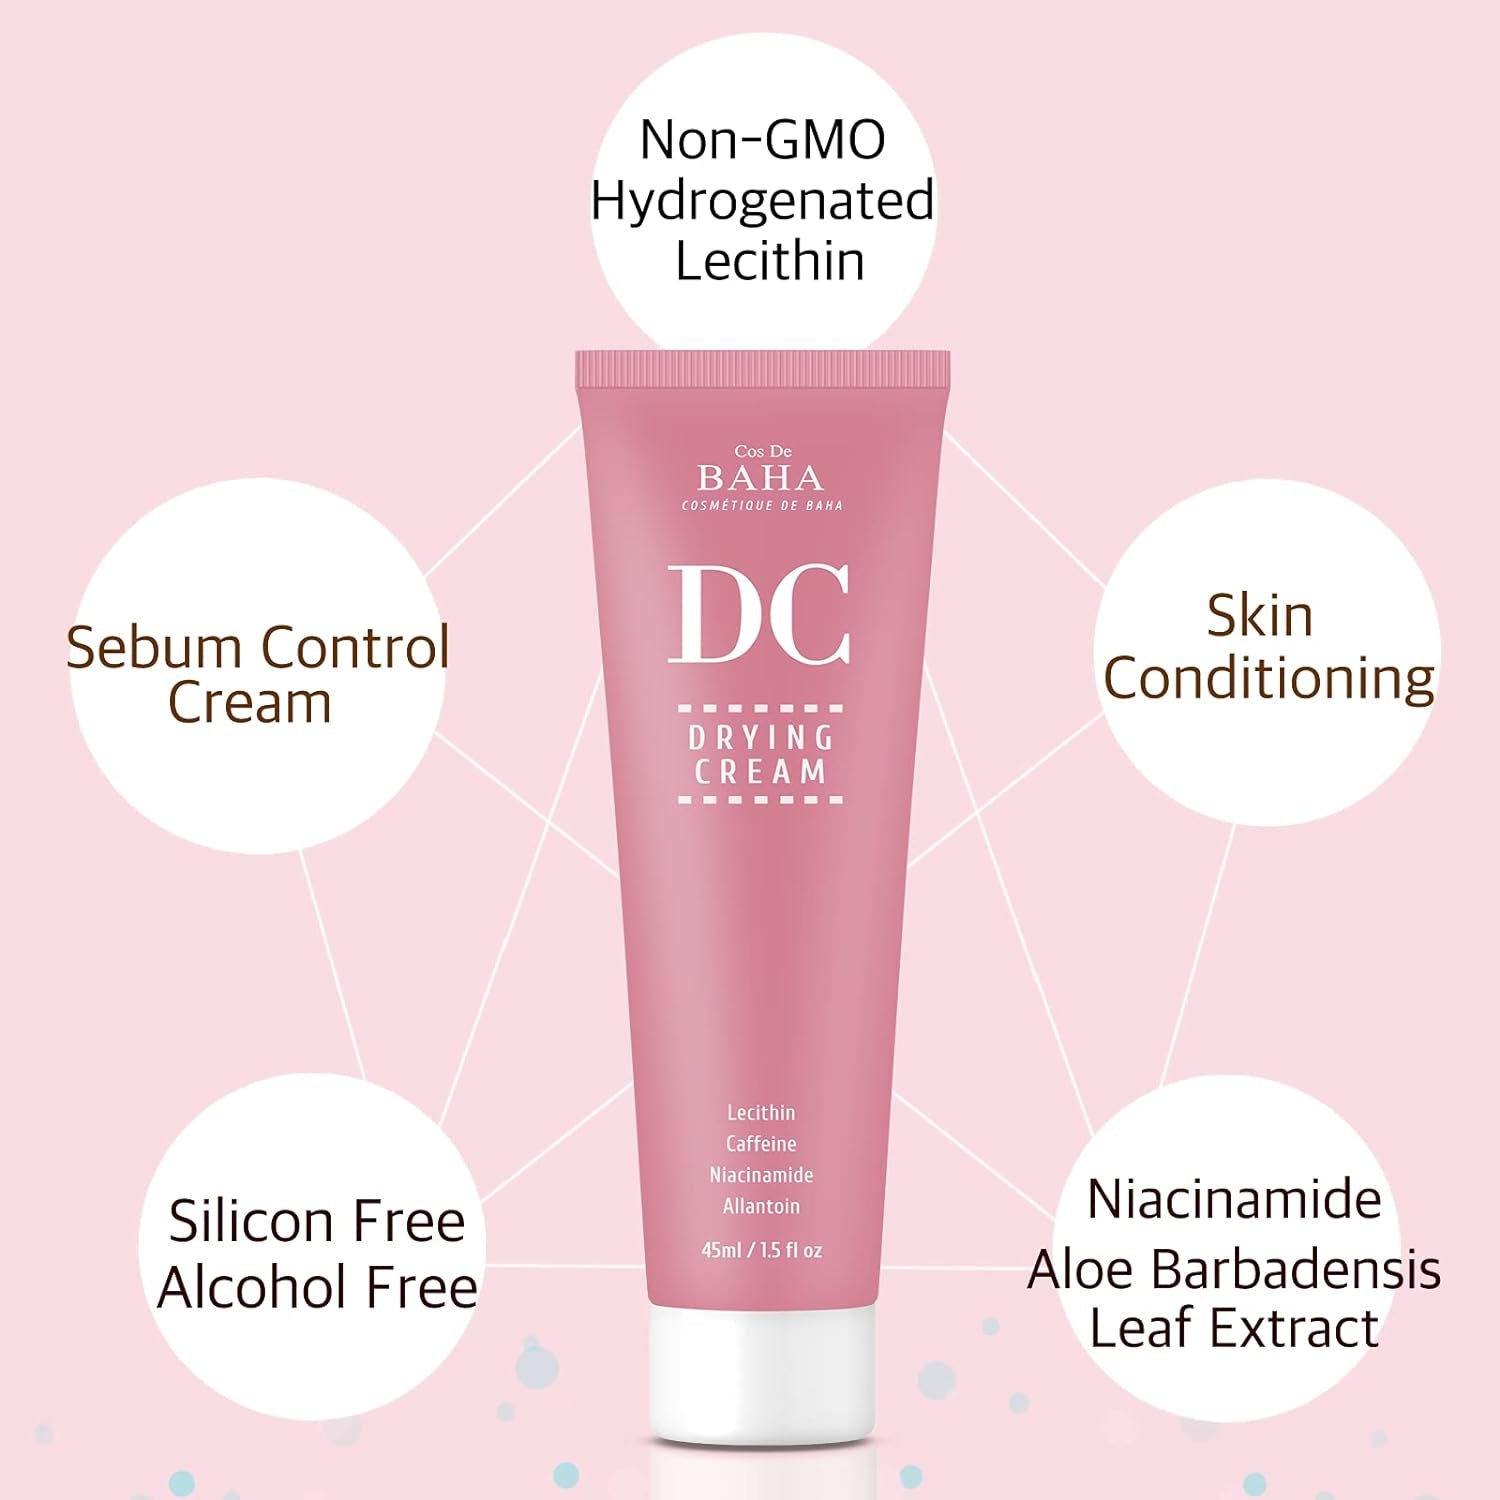 Cos De BAHA Drying Cream for Face Sebum Control Oily Skin Moisturizer with Hydrogenated Lecithin + Niacinamide 5% - Silicon Free, Alcohol Free, Facial Skin Conditioning, 1.5 Fl Oz (45Ml)